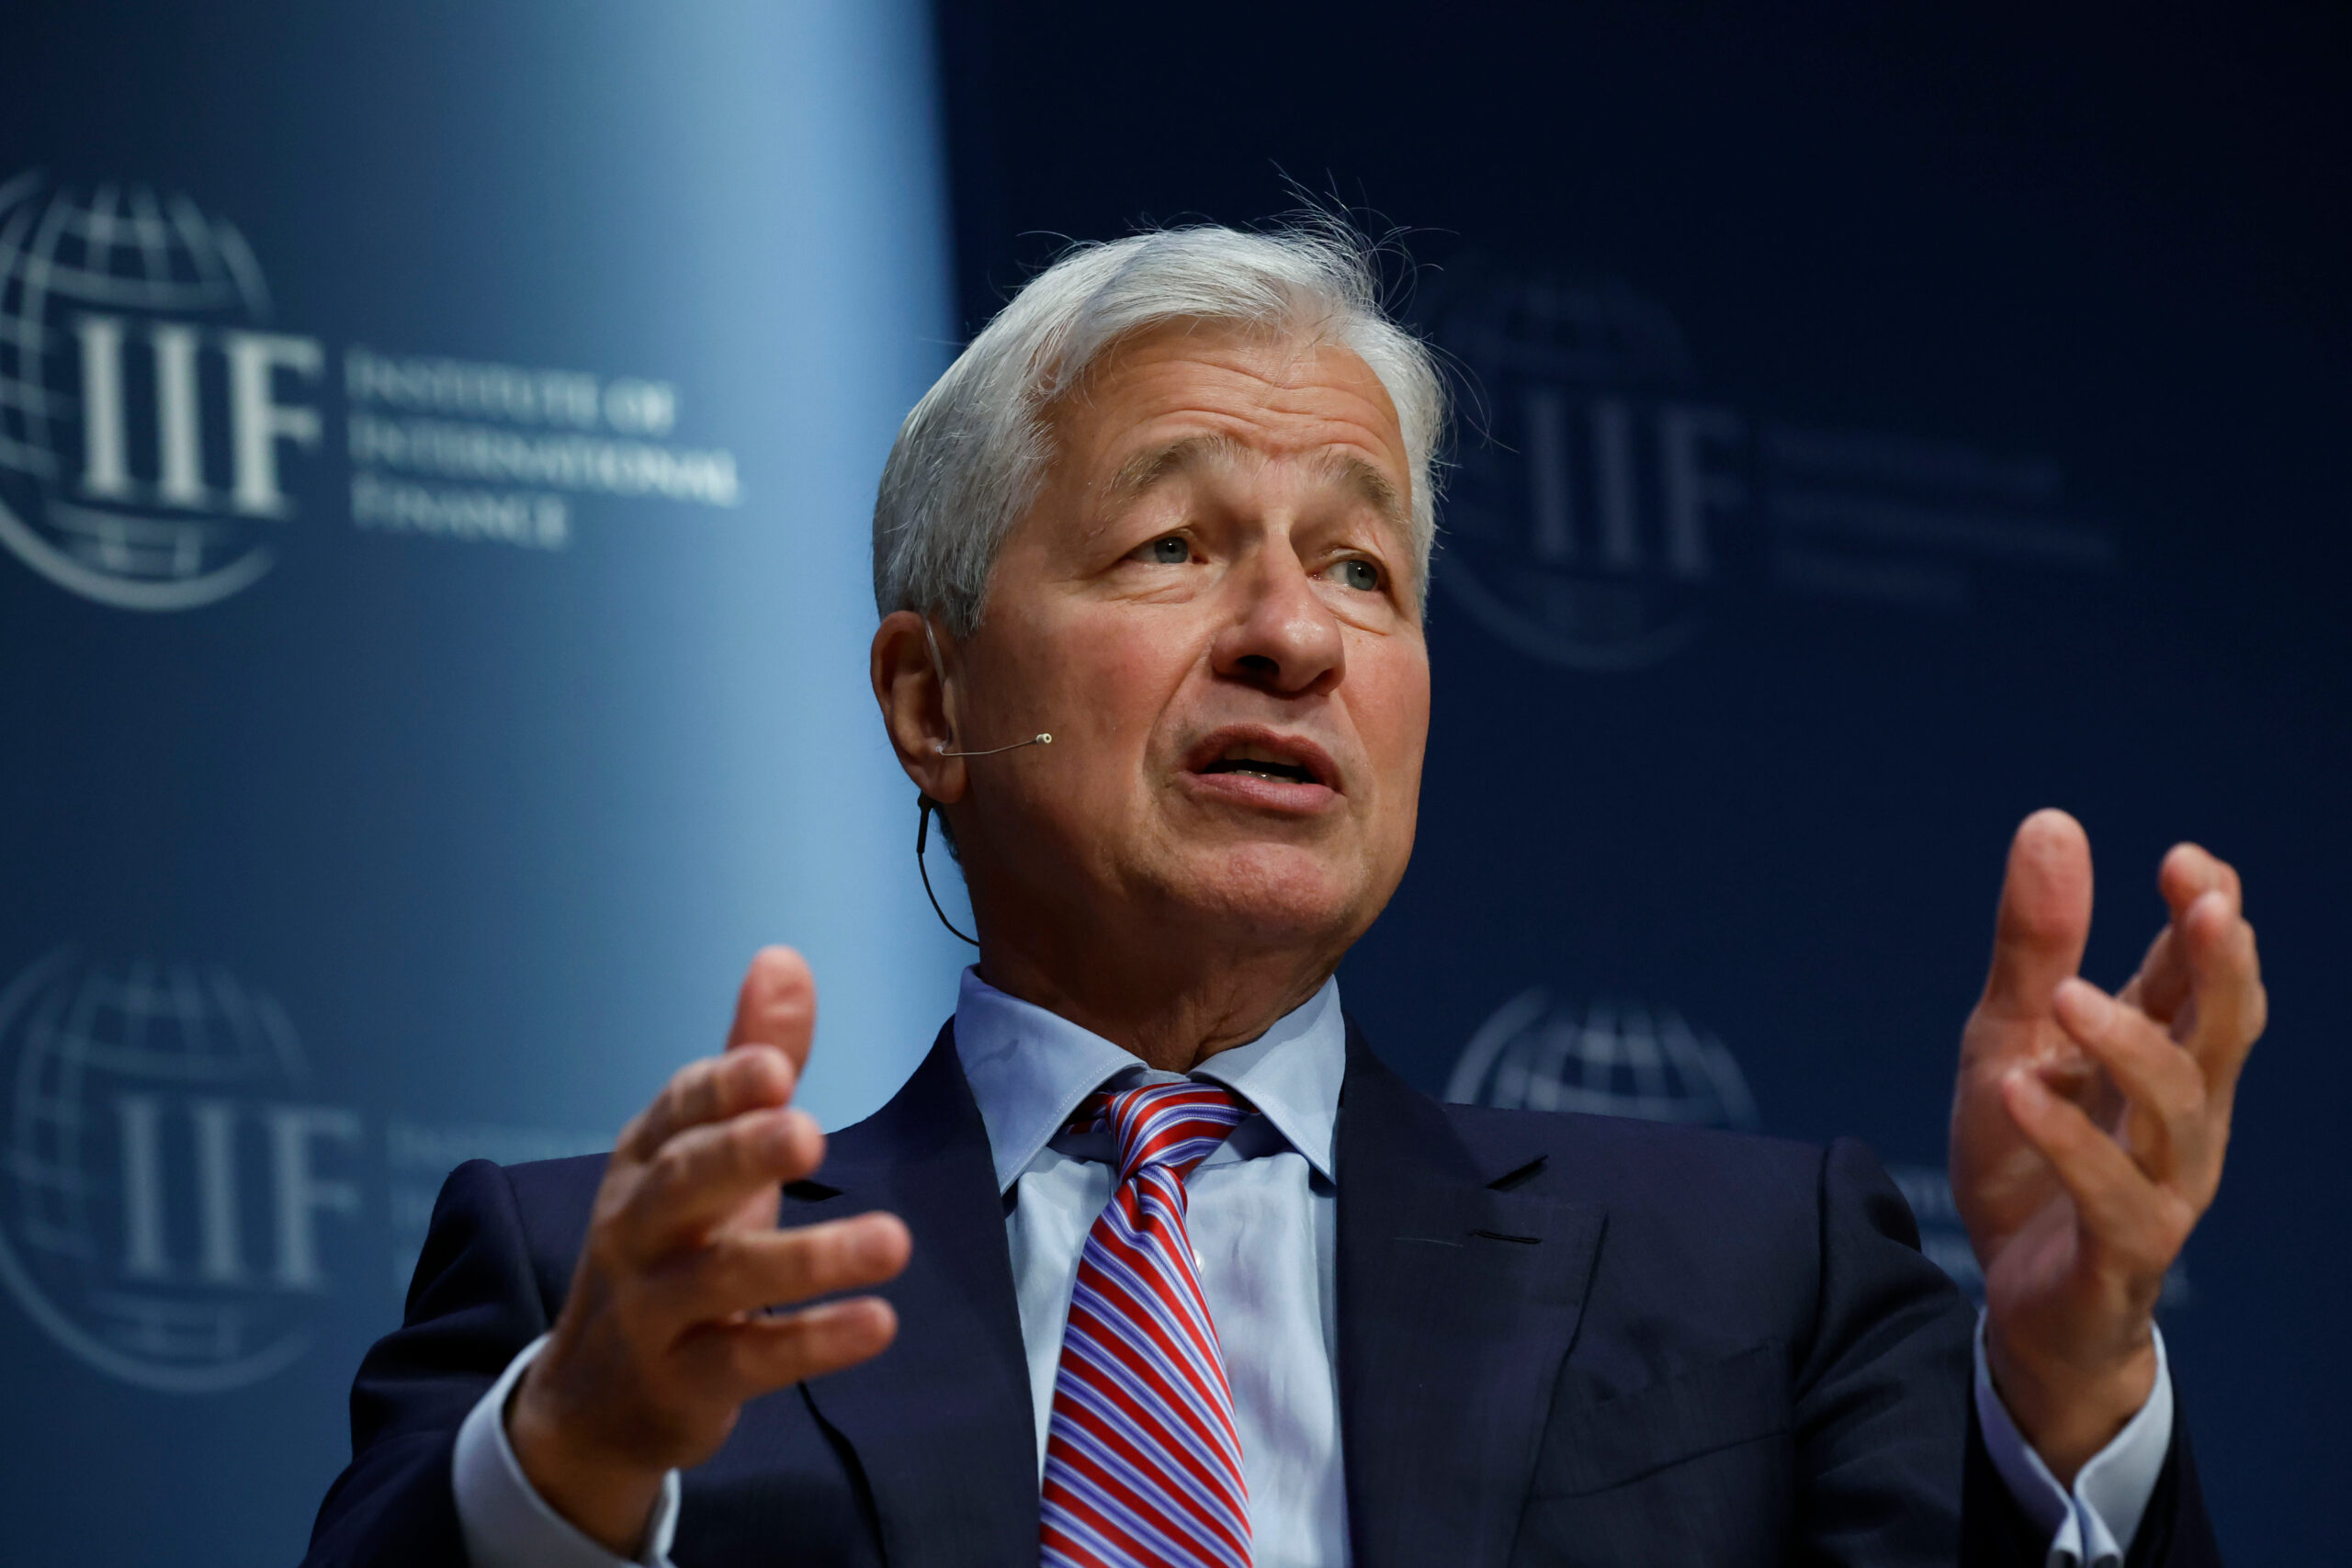 JPMorgan Chase CEO Suggests Seizing Private Property To Build More Solar Farms